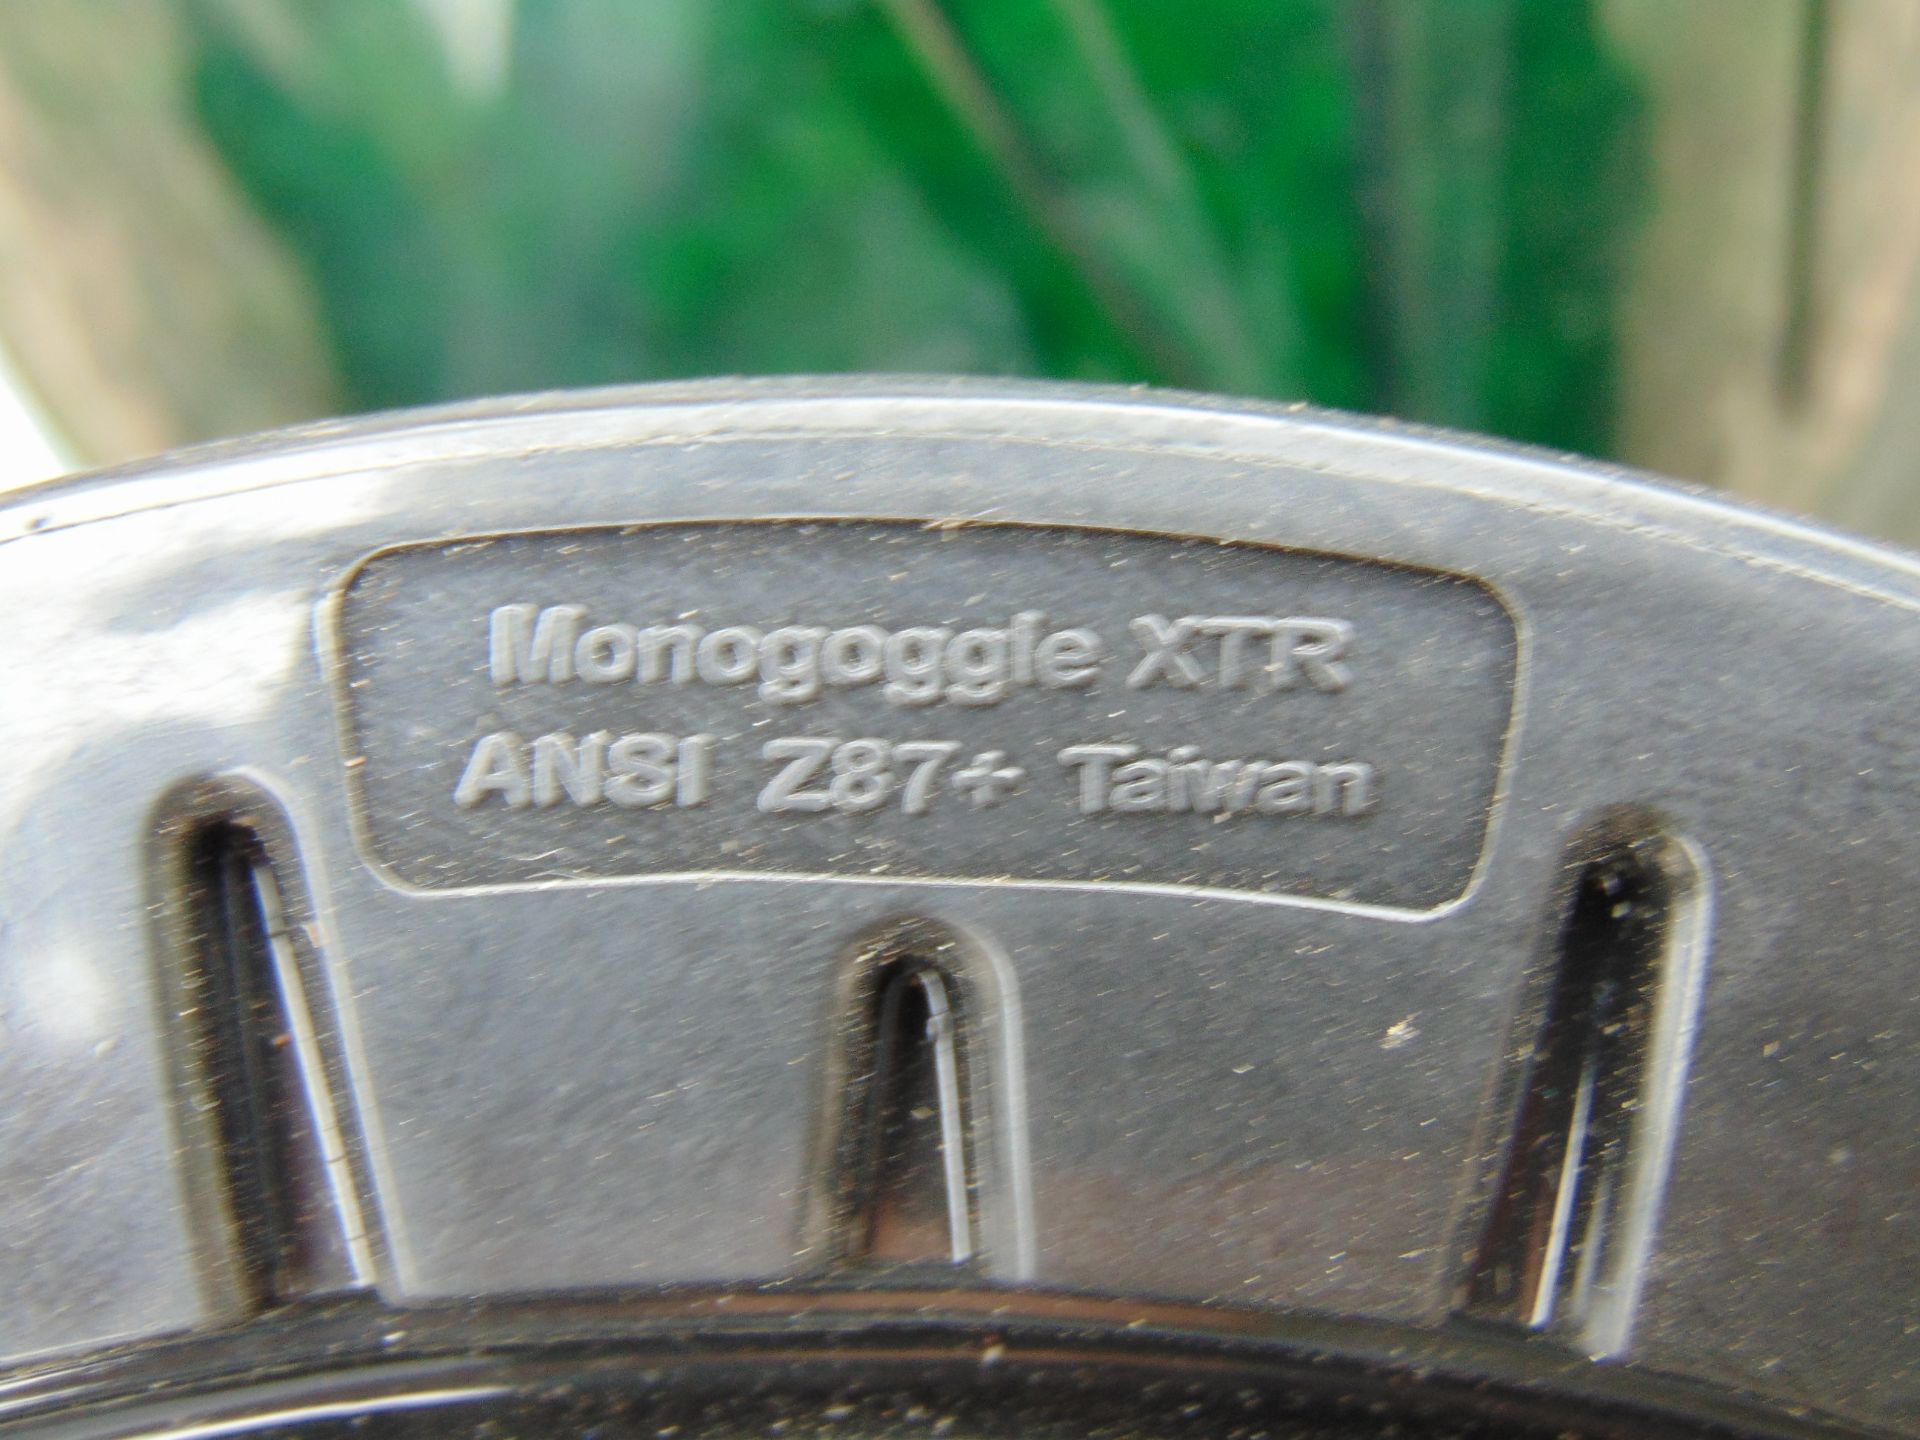 2 x Monogoggle XTR Safety Goggles C/W Face Shields - Image 6 of 6